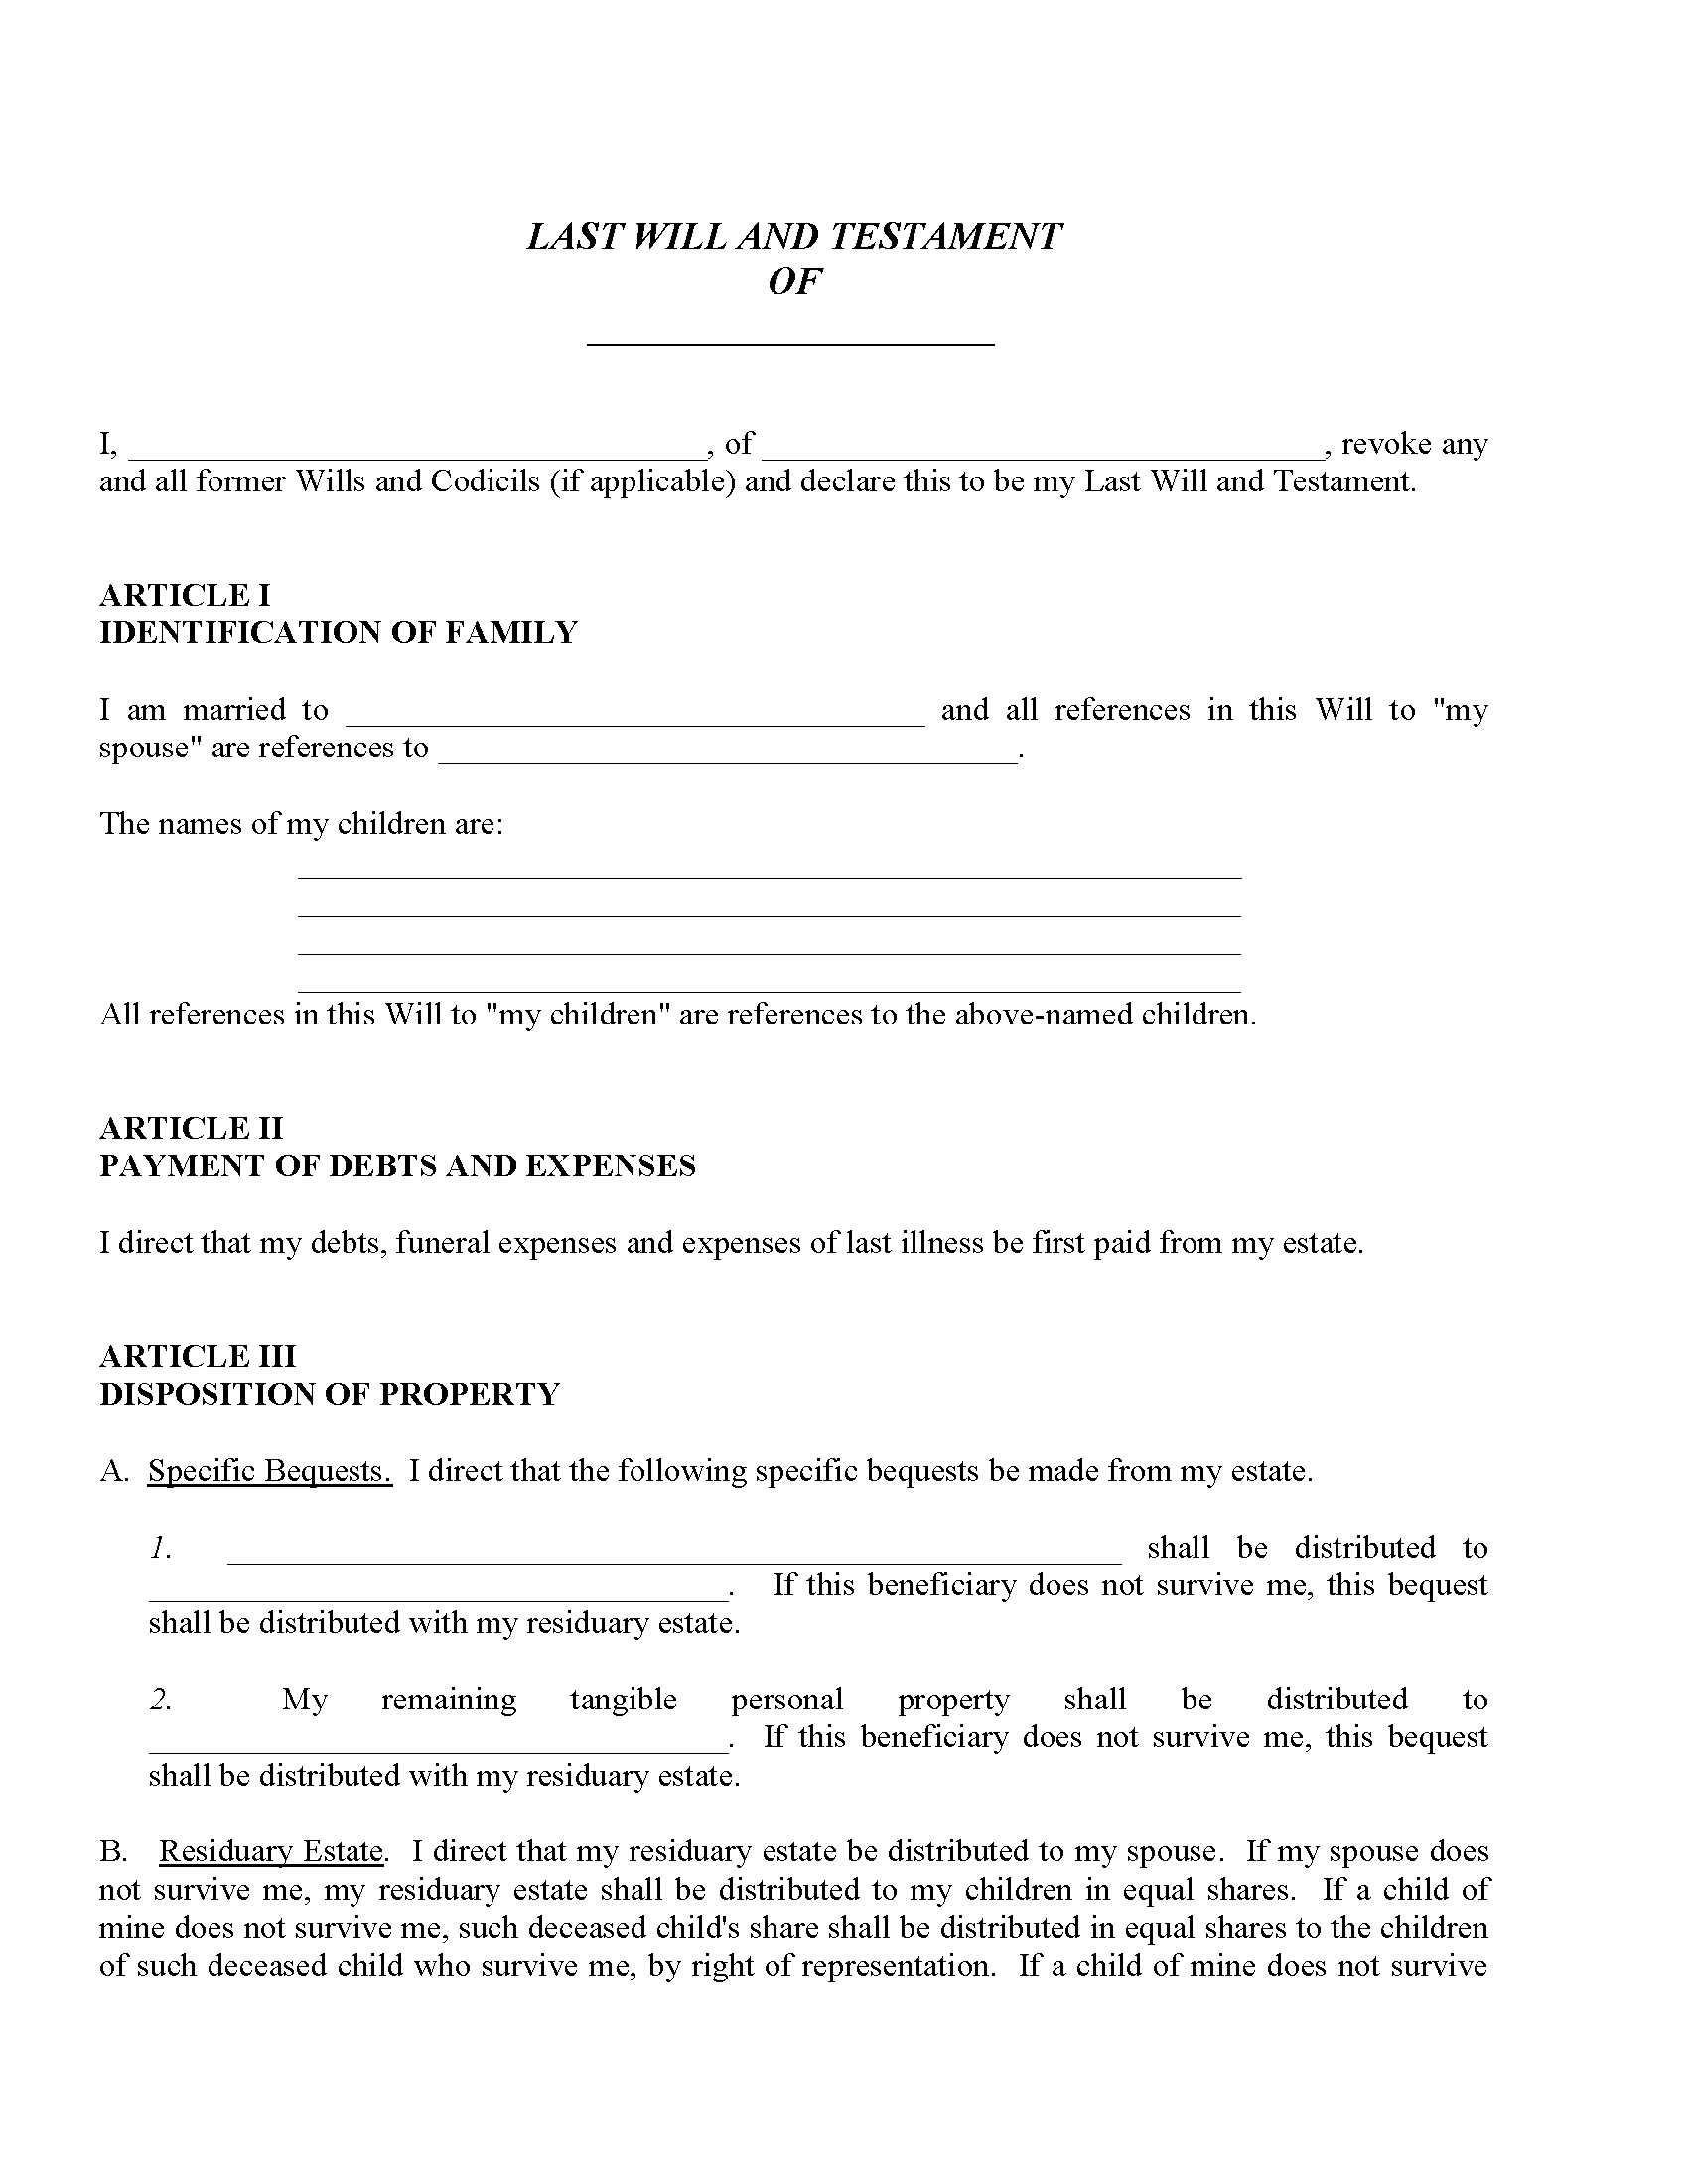 Oregon Last Will and Testament Free Printable Legal Forms